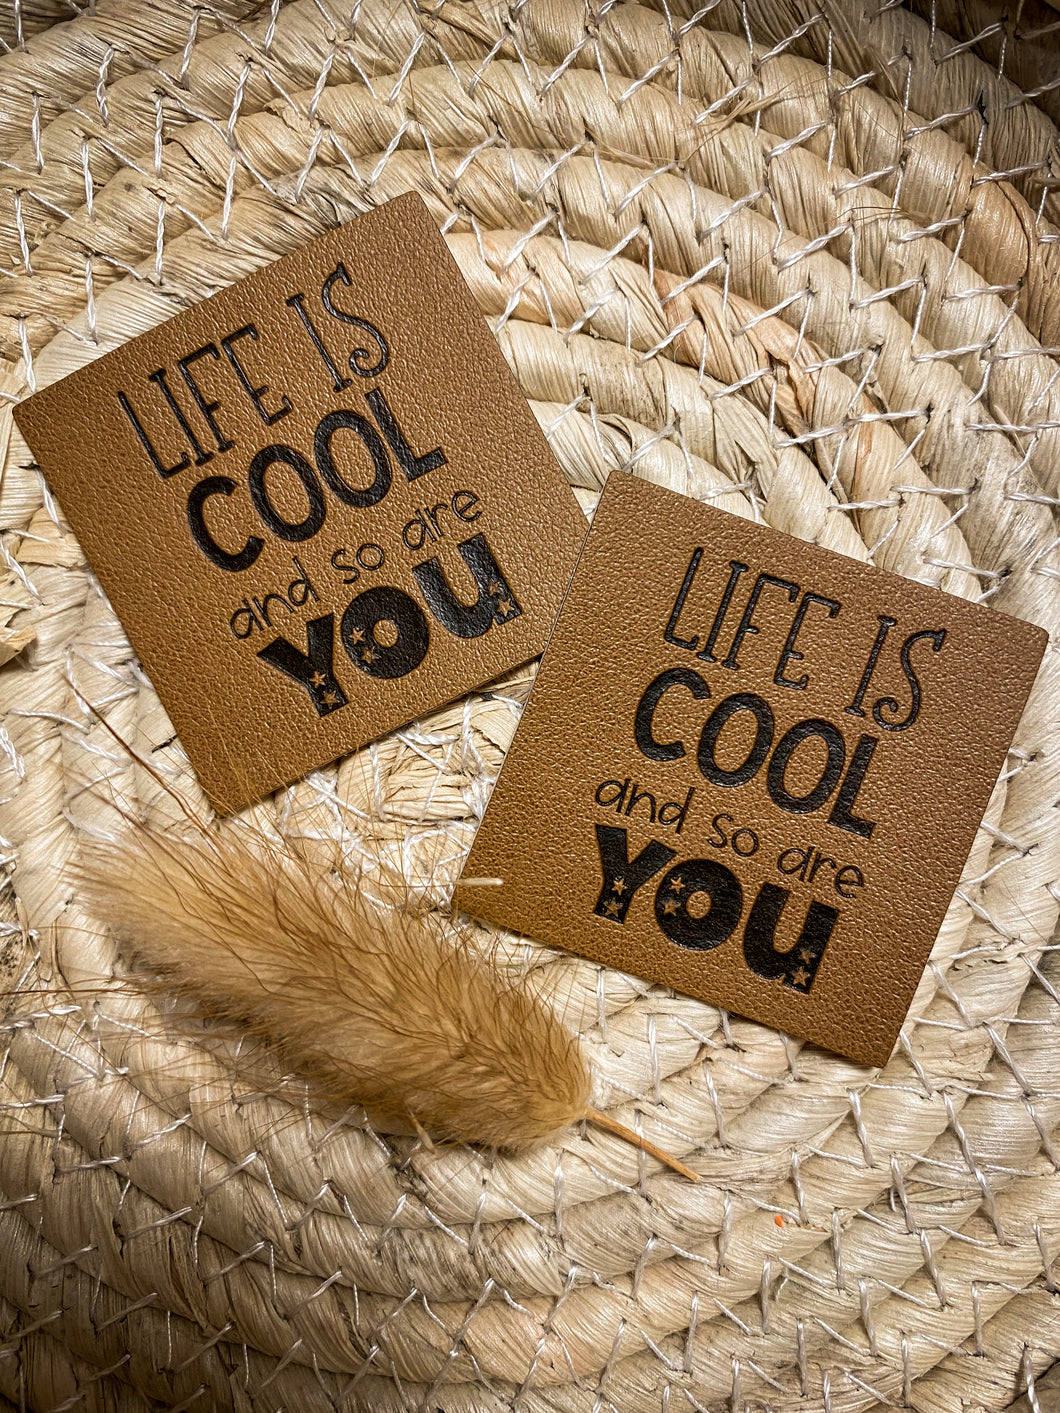 Life is cool and so are you Label